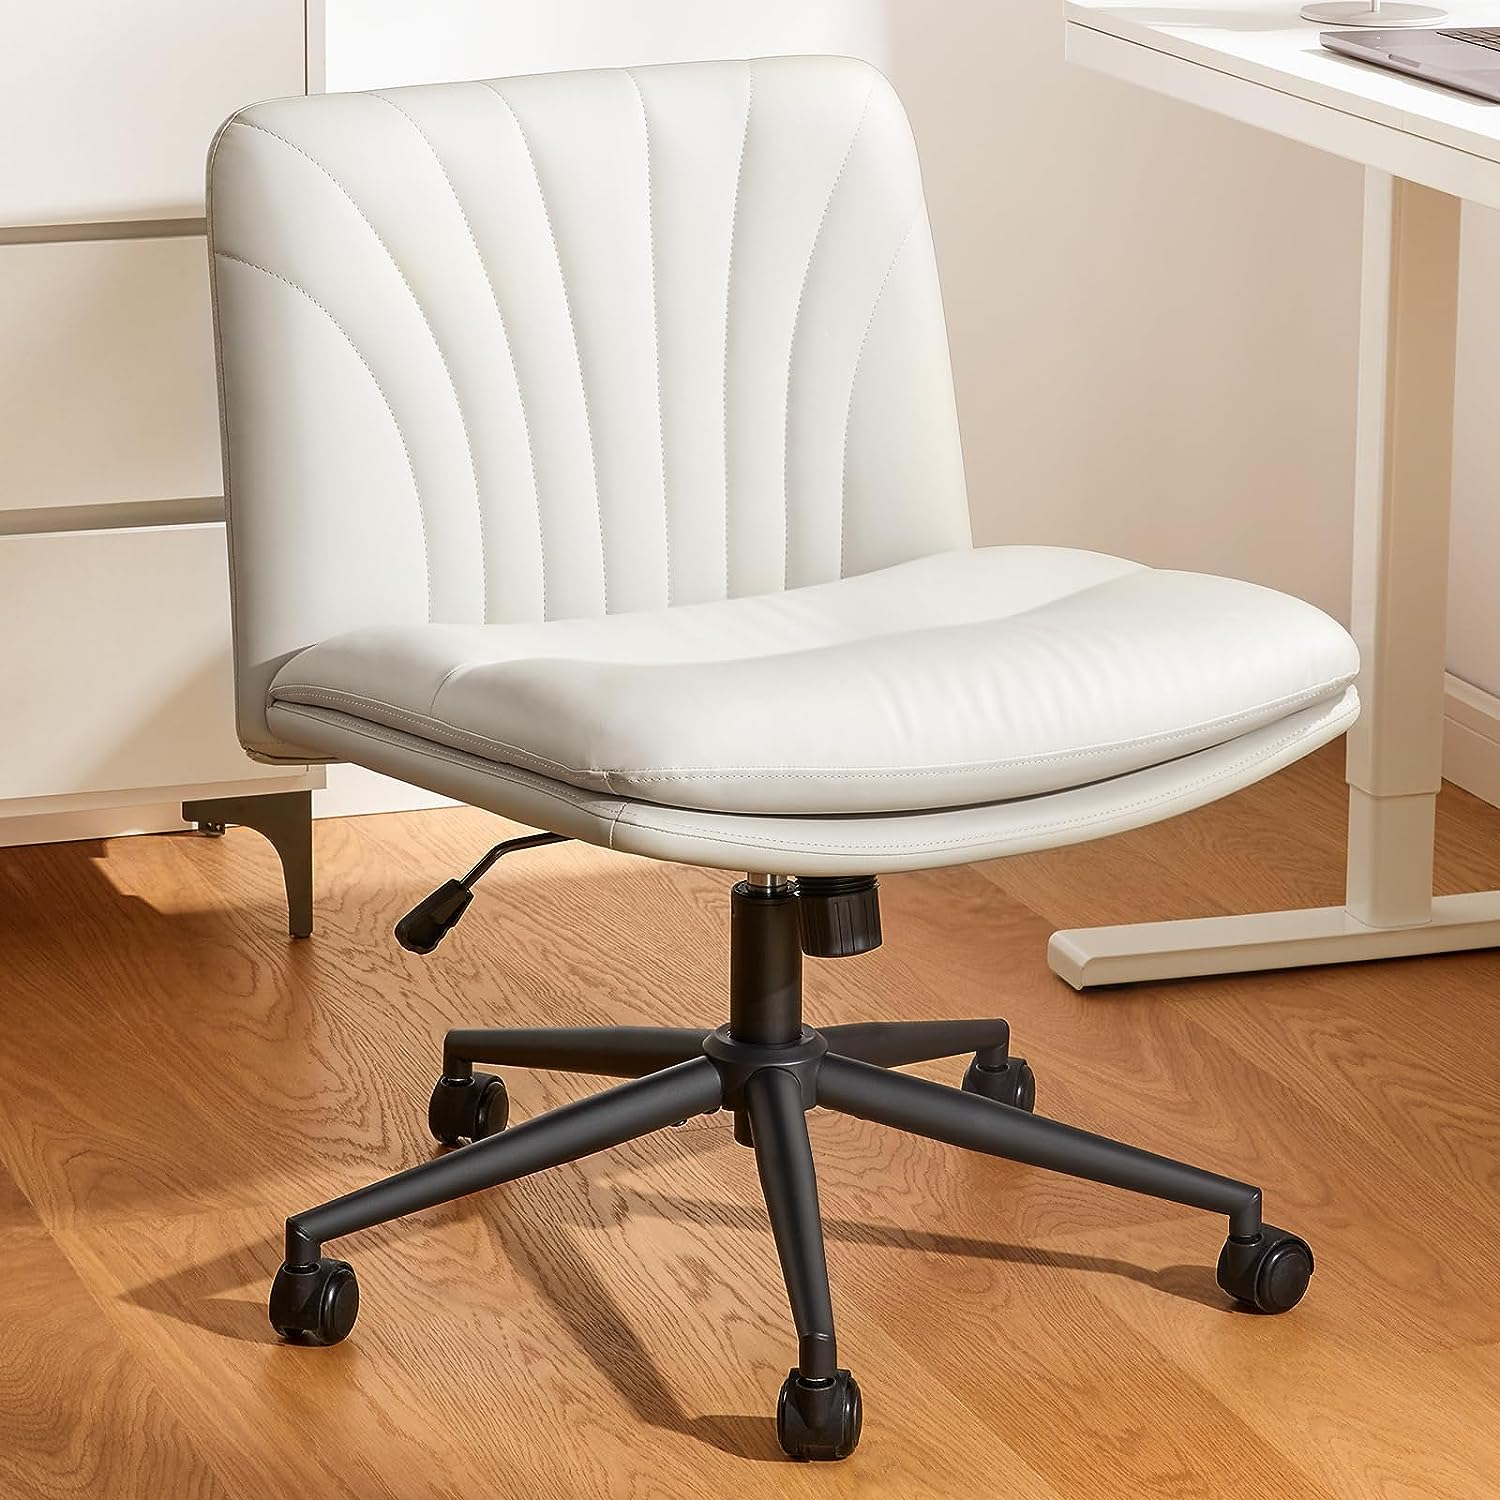 Marsail Armless-Office Desk Chair with Wheels